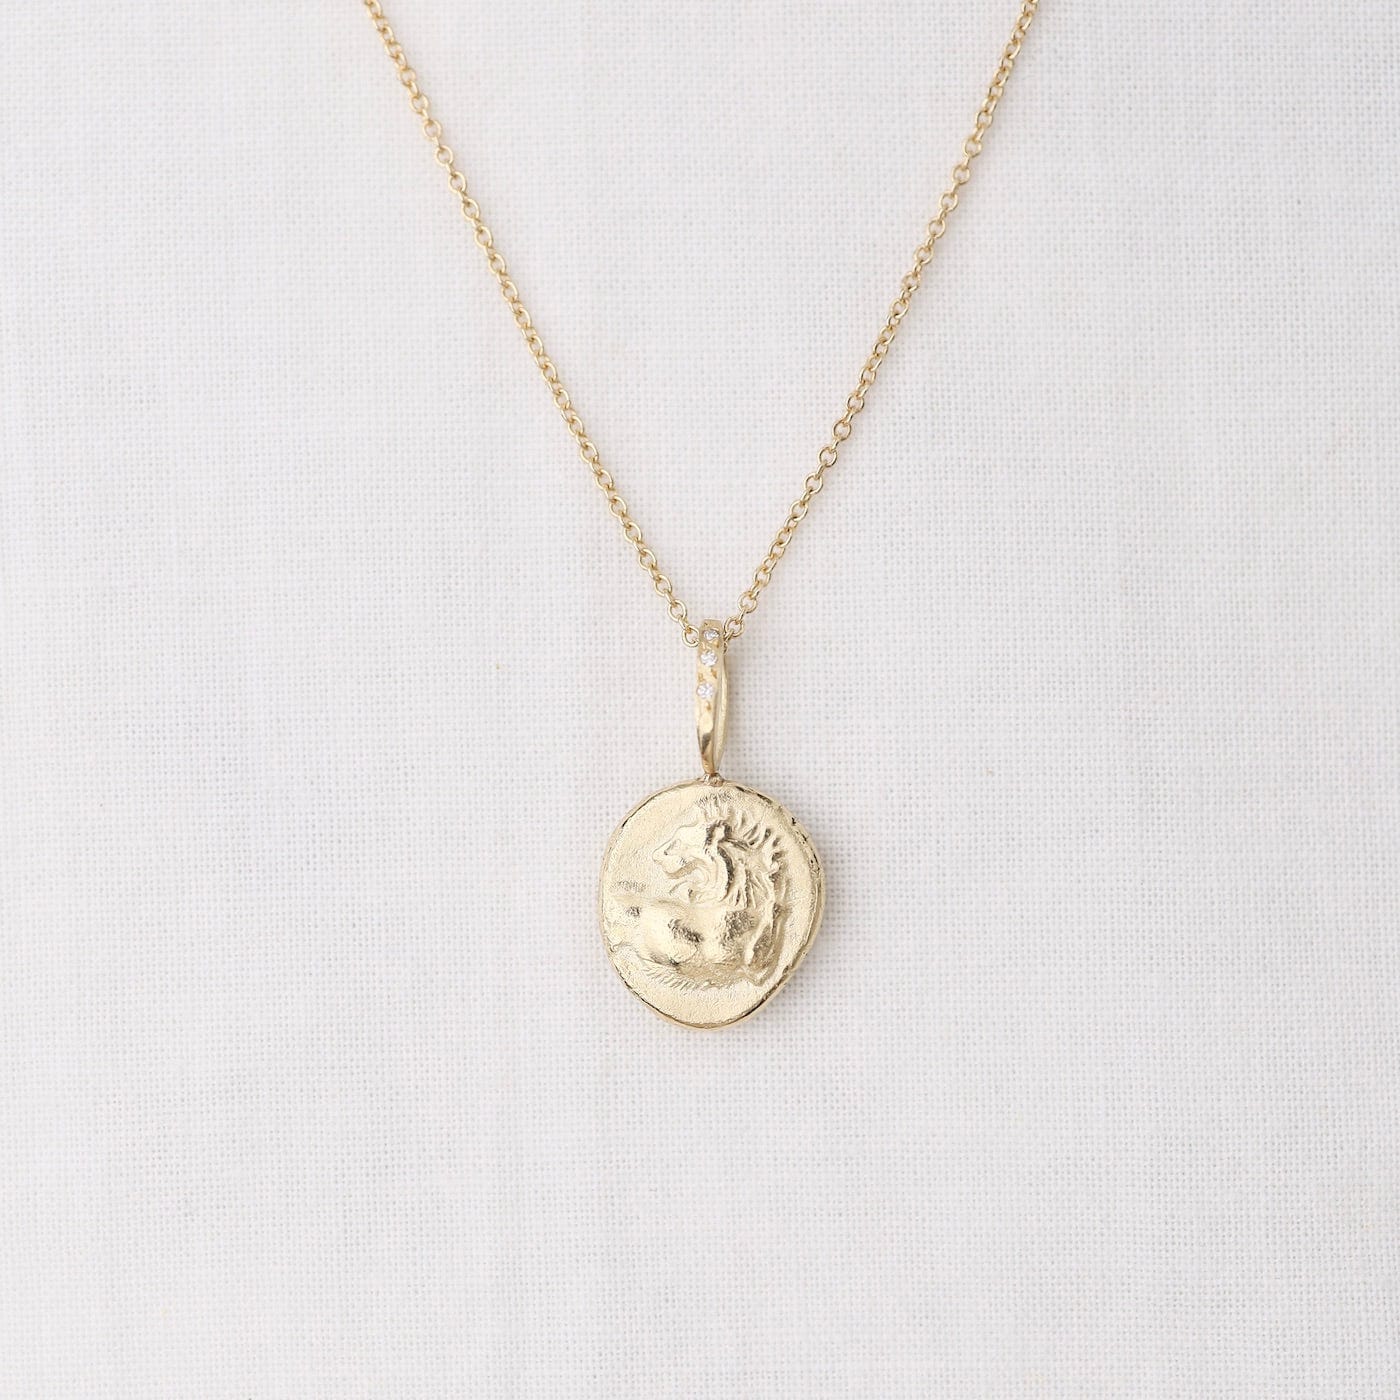 NKL-14K Self Empowered Artifact 14k Gold Necklace